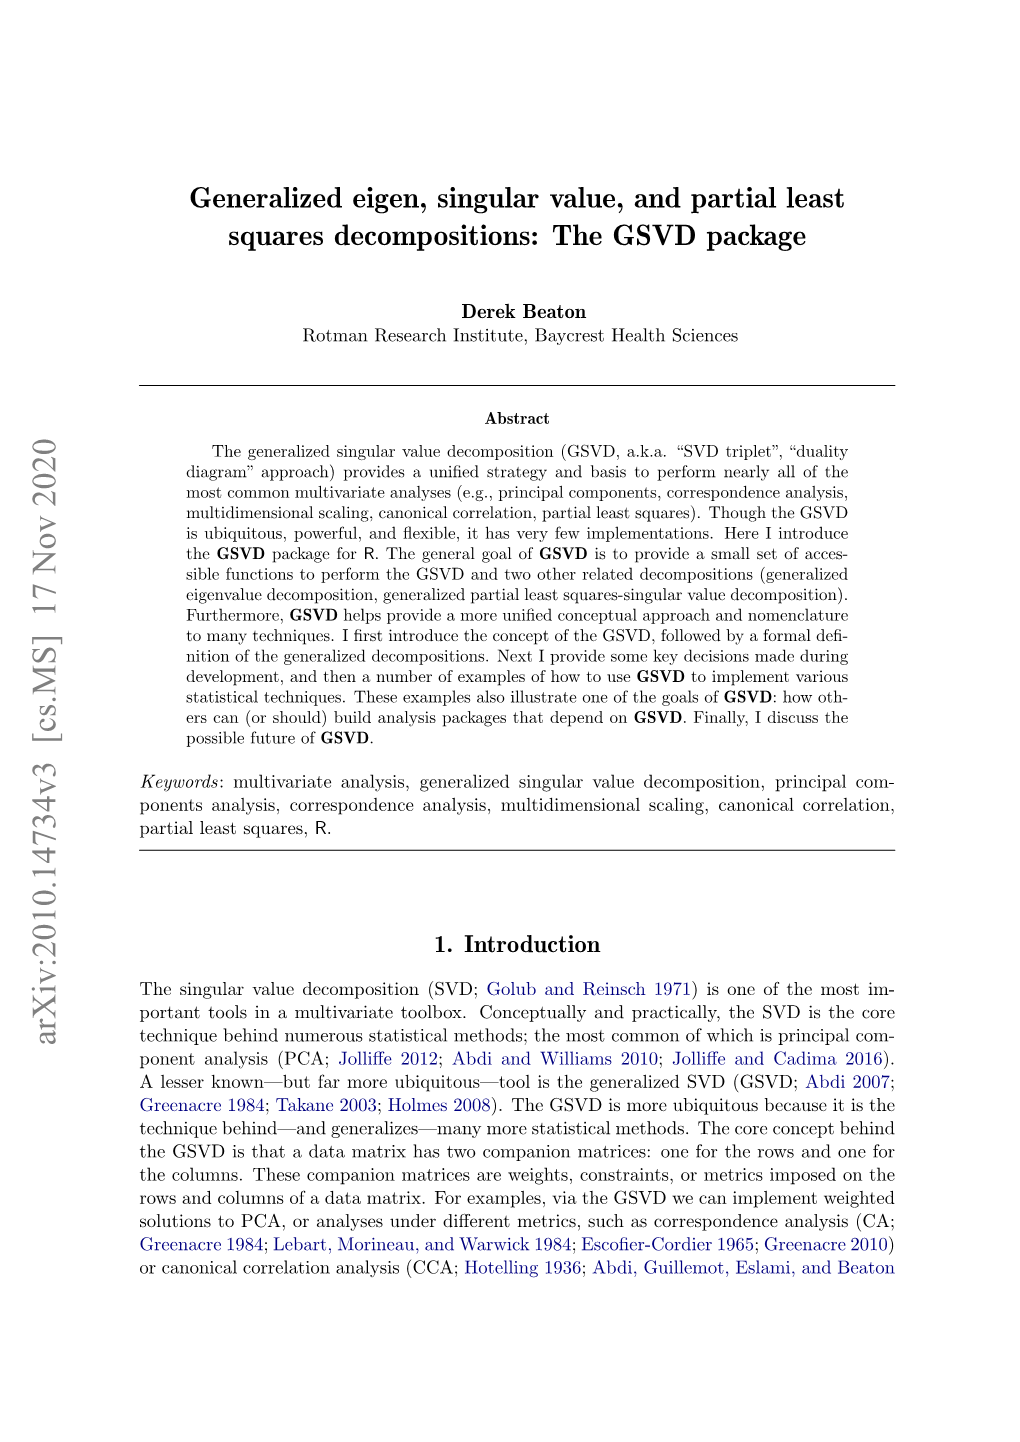 Generalized Eigen, Singular Value, and Partial Least Squares Decompositions: the GSVD Package